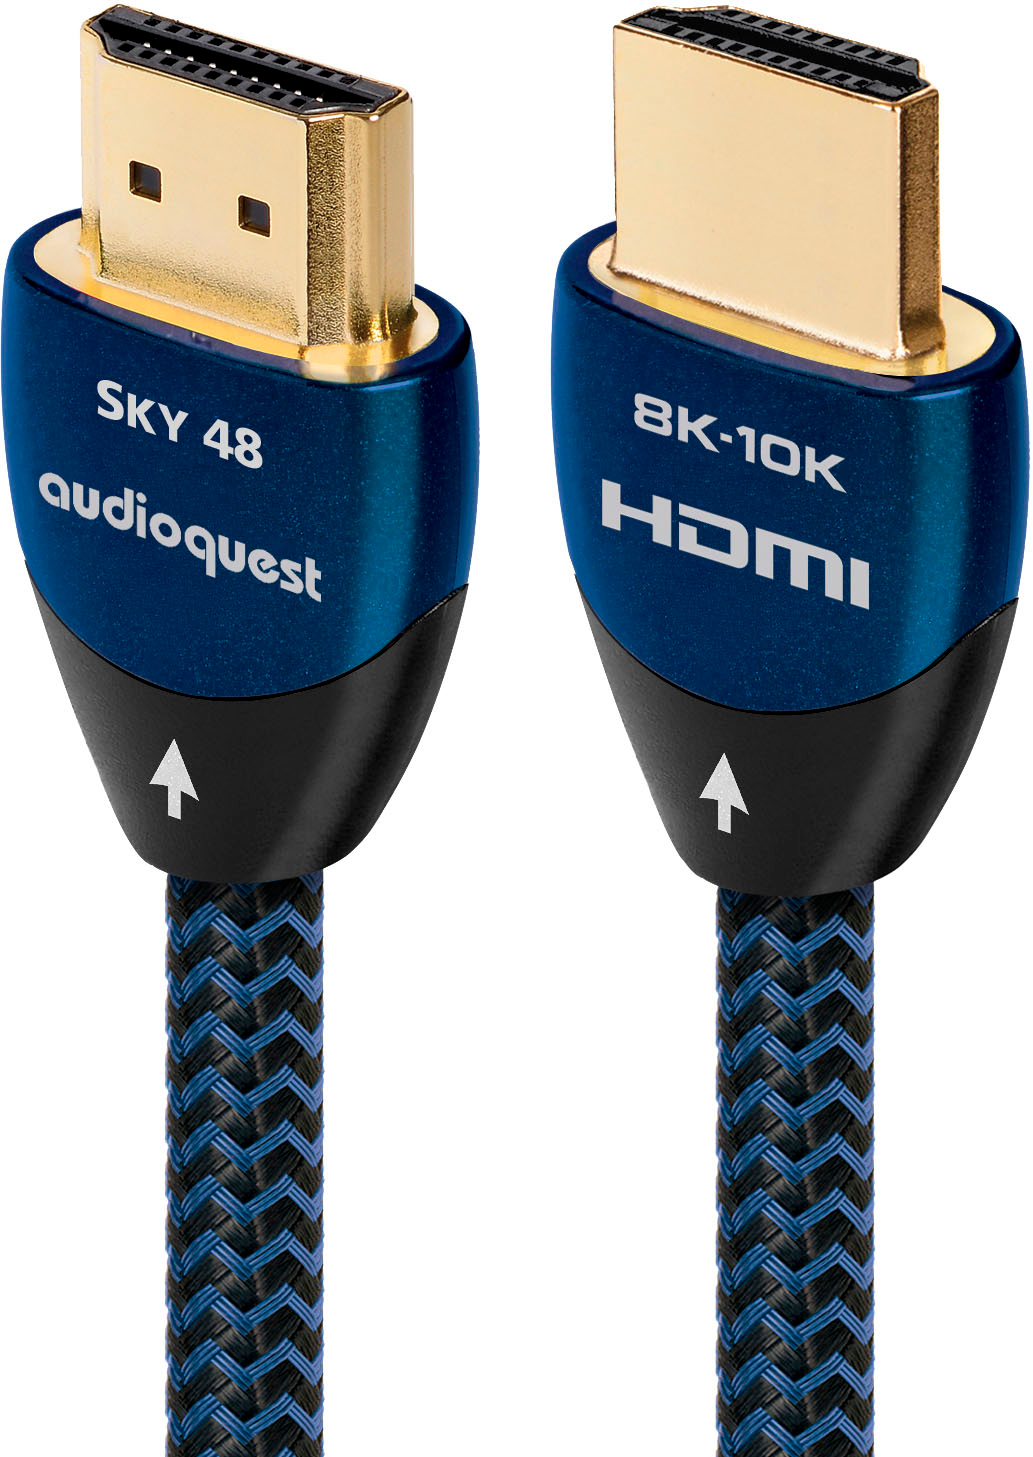 CanaKit 6' micro HDMI to HDMI Cable 2 Pack Black CK  - Best Buy